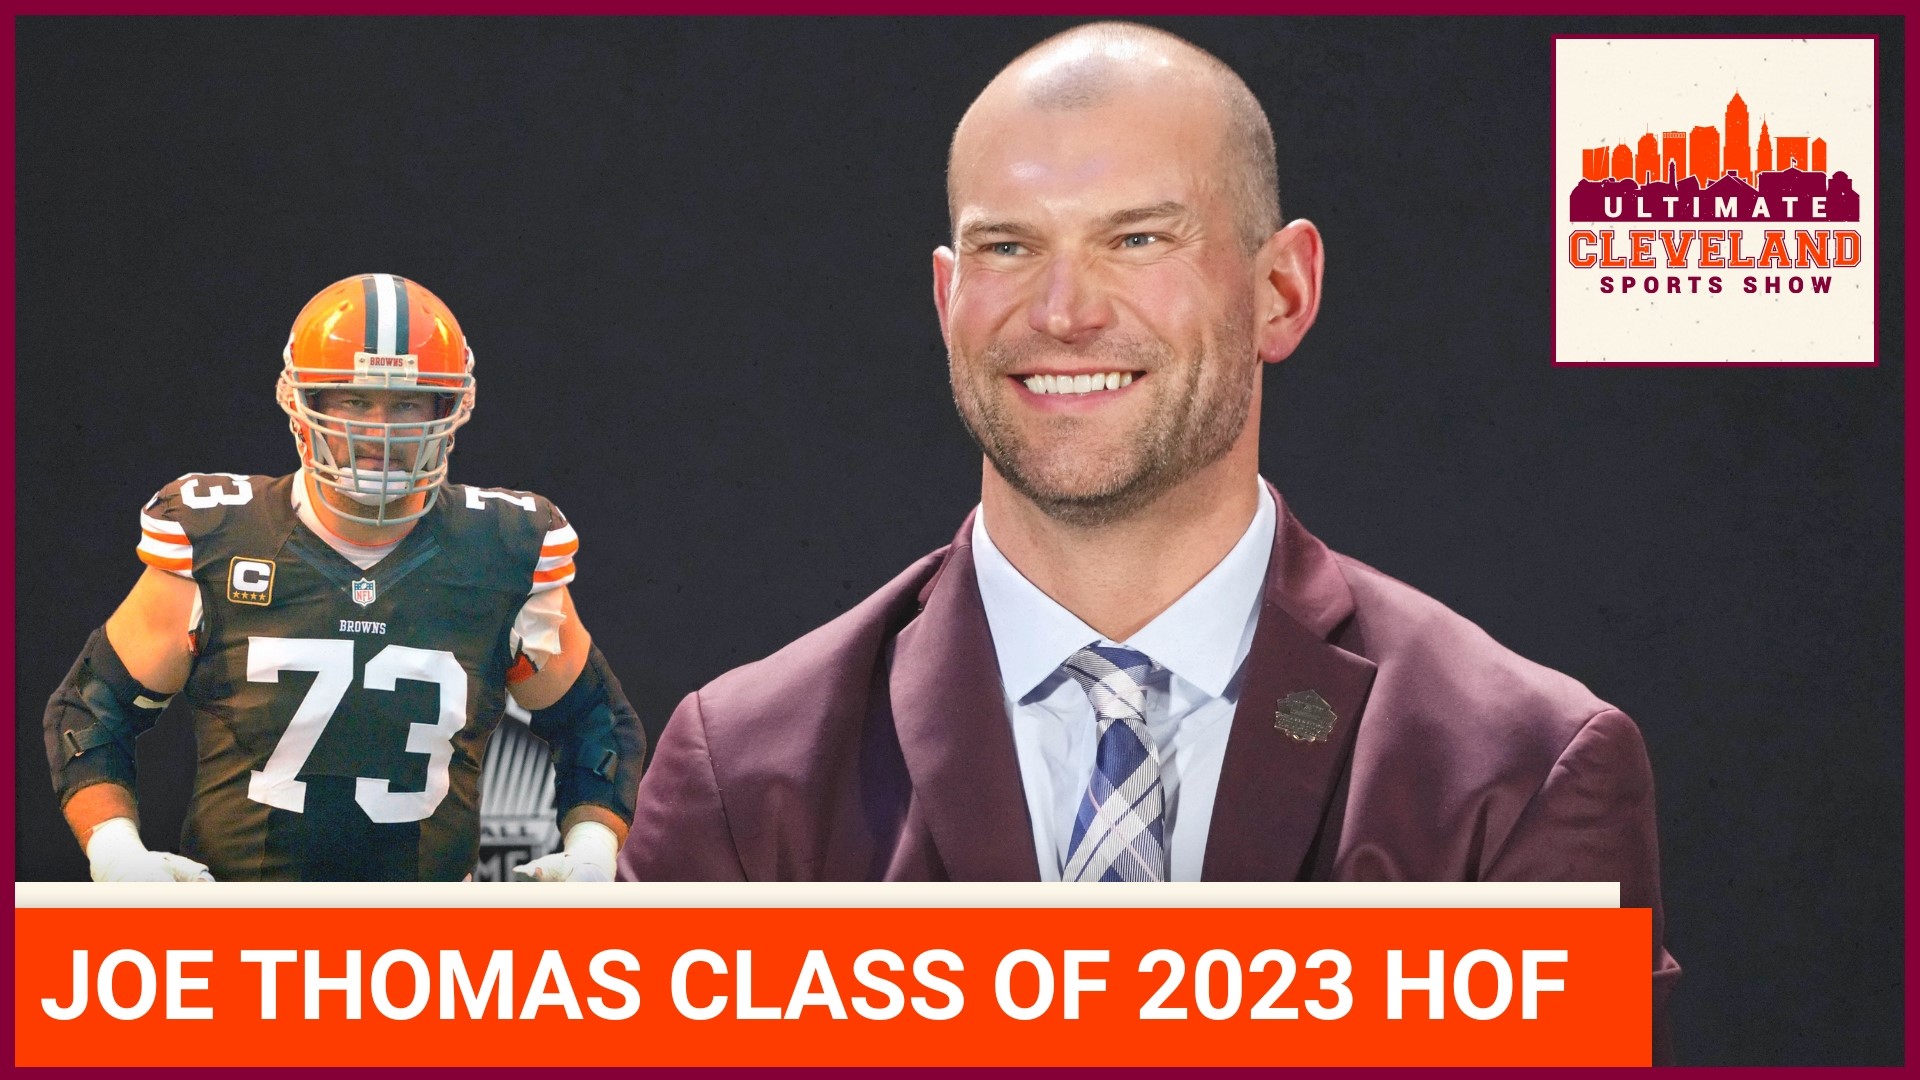 Joe Thomas becomes the first Cleveland Browns player inducted into the Pro Football Hall of Fame since the team returned in 1999